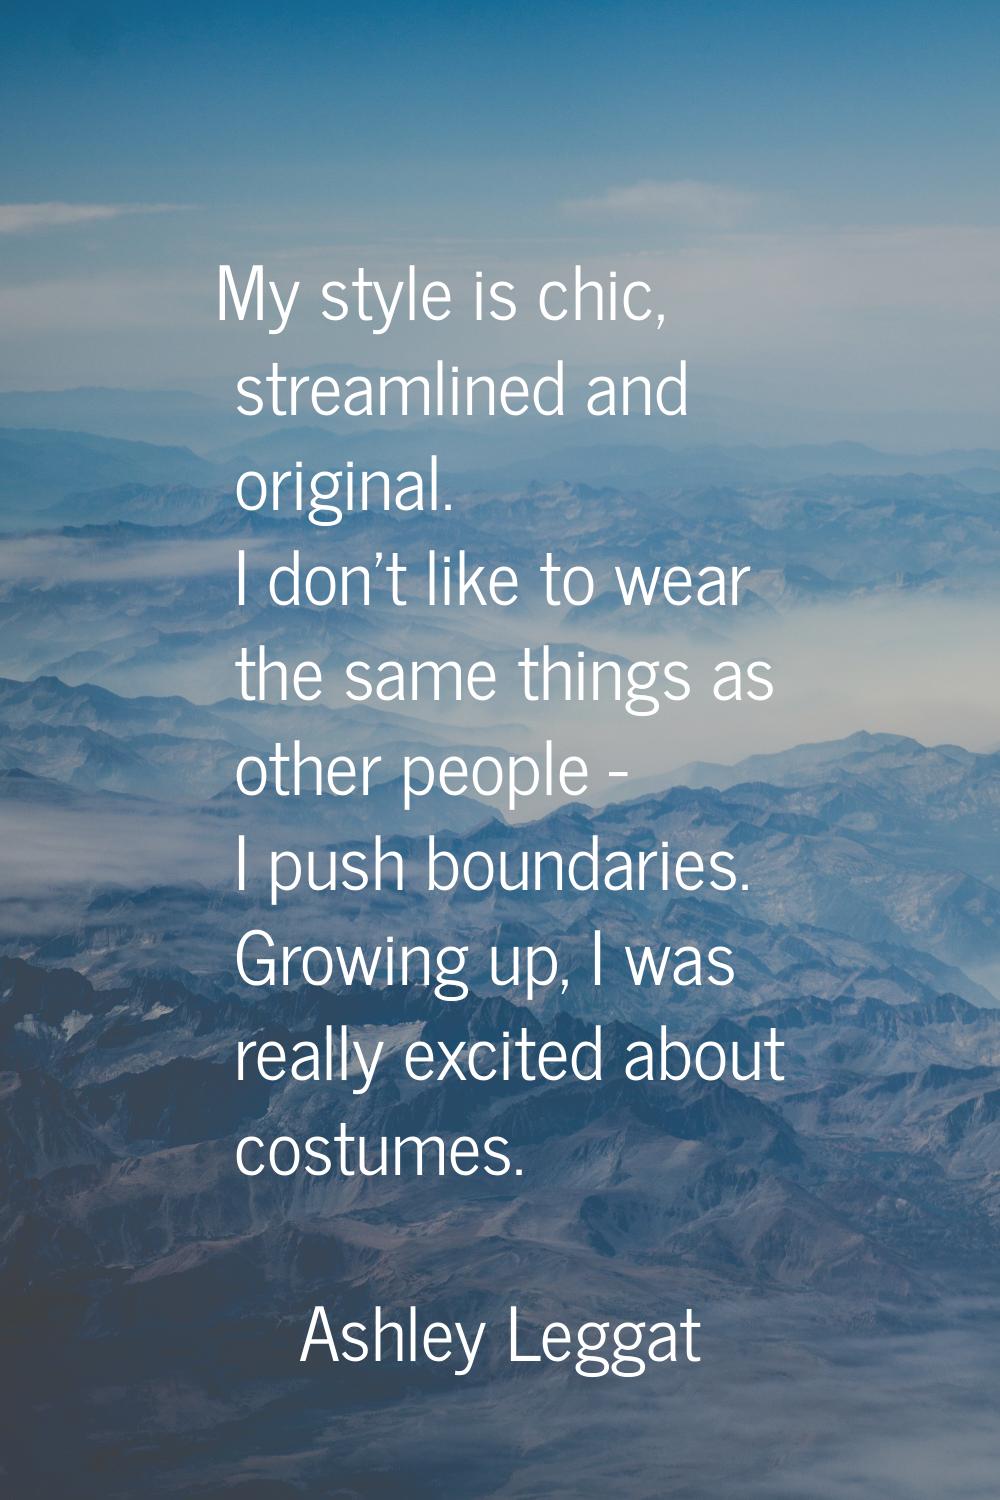 My style is chic, streamlined and original. I don't like to wear the same things as other people - 